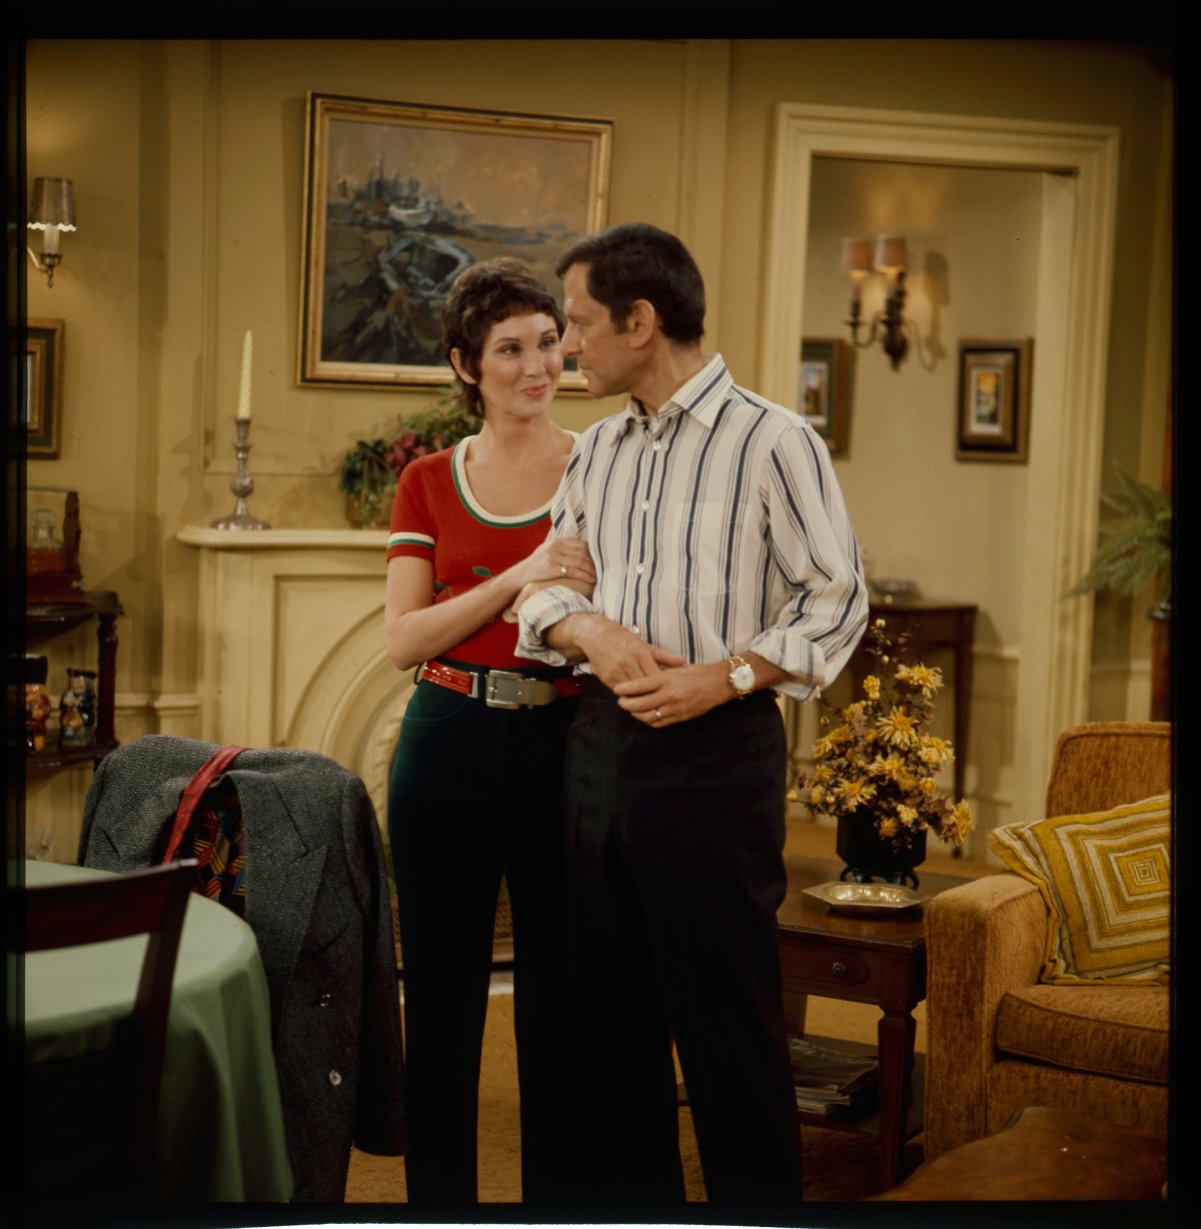 Actors Elinor Donahue and Tony Randall in a scene from 'The Odd Couple'